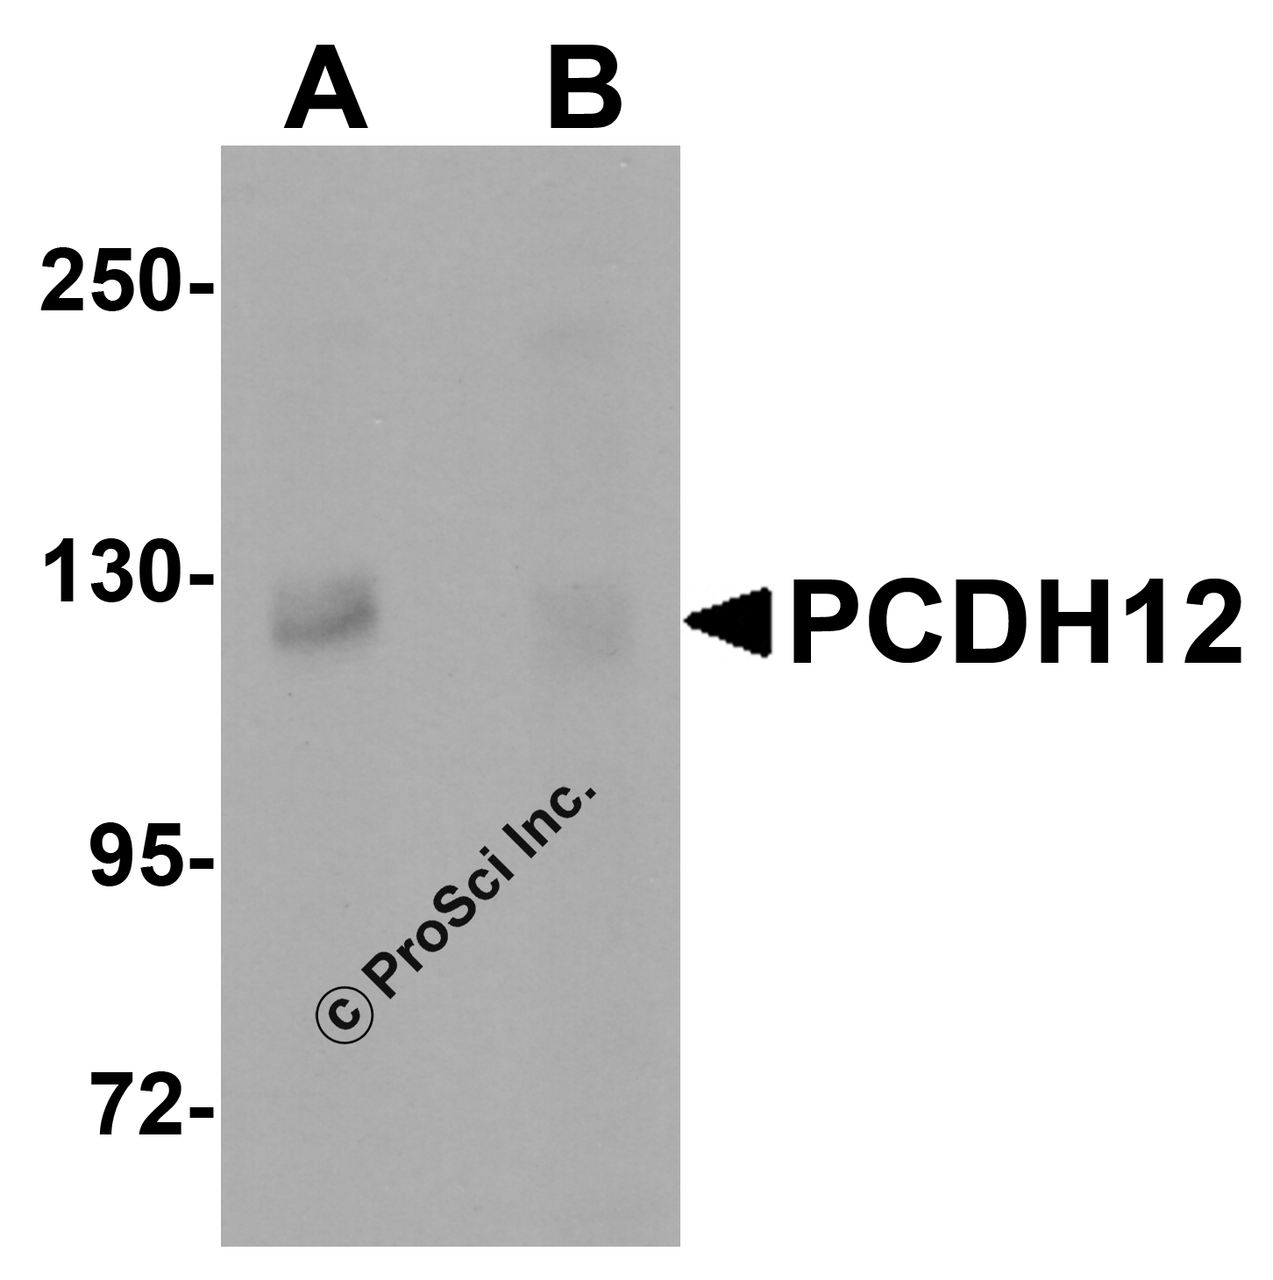 Western blot analysis of PCDH12 in K562 cell lysate with PCDH12 antibody at 1 &#956;g/mL in (A) the absence and (B) the presence of blocking peptide.